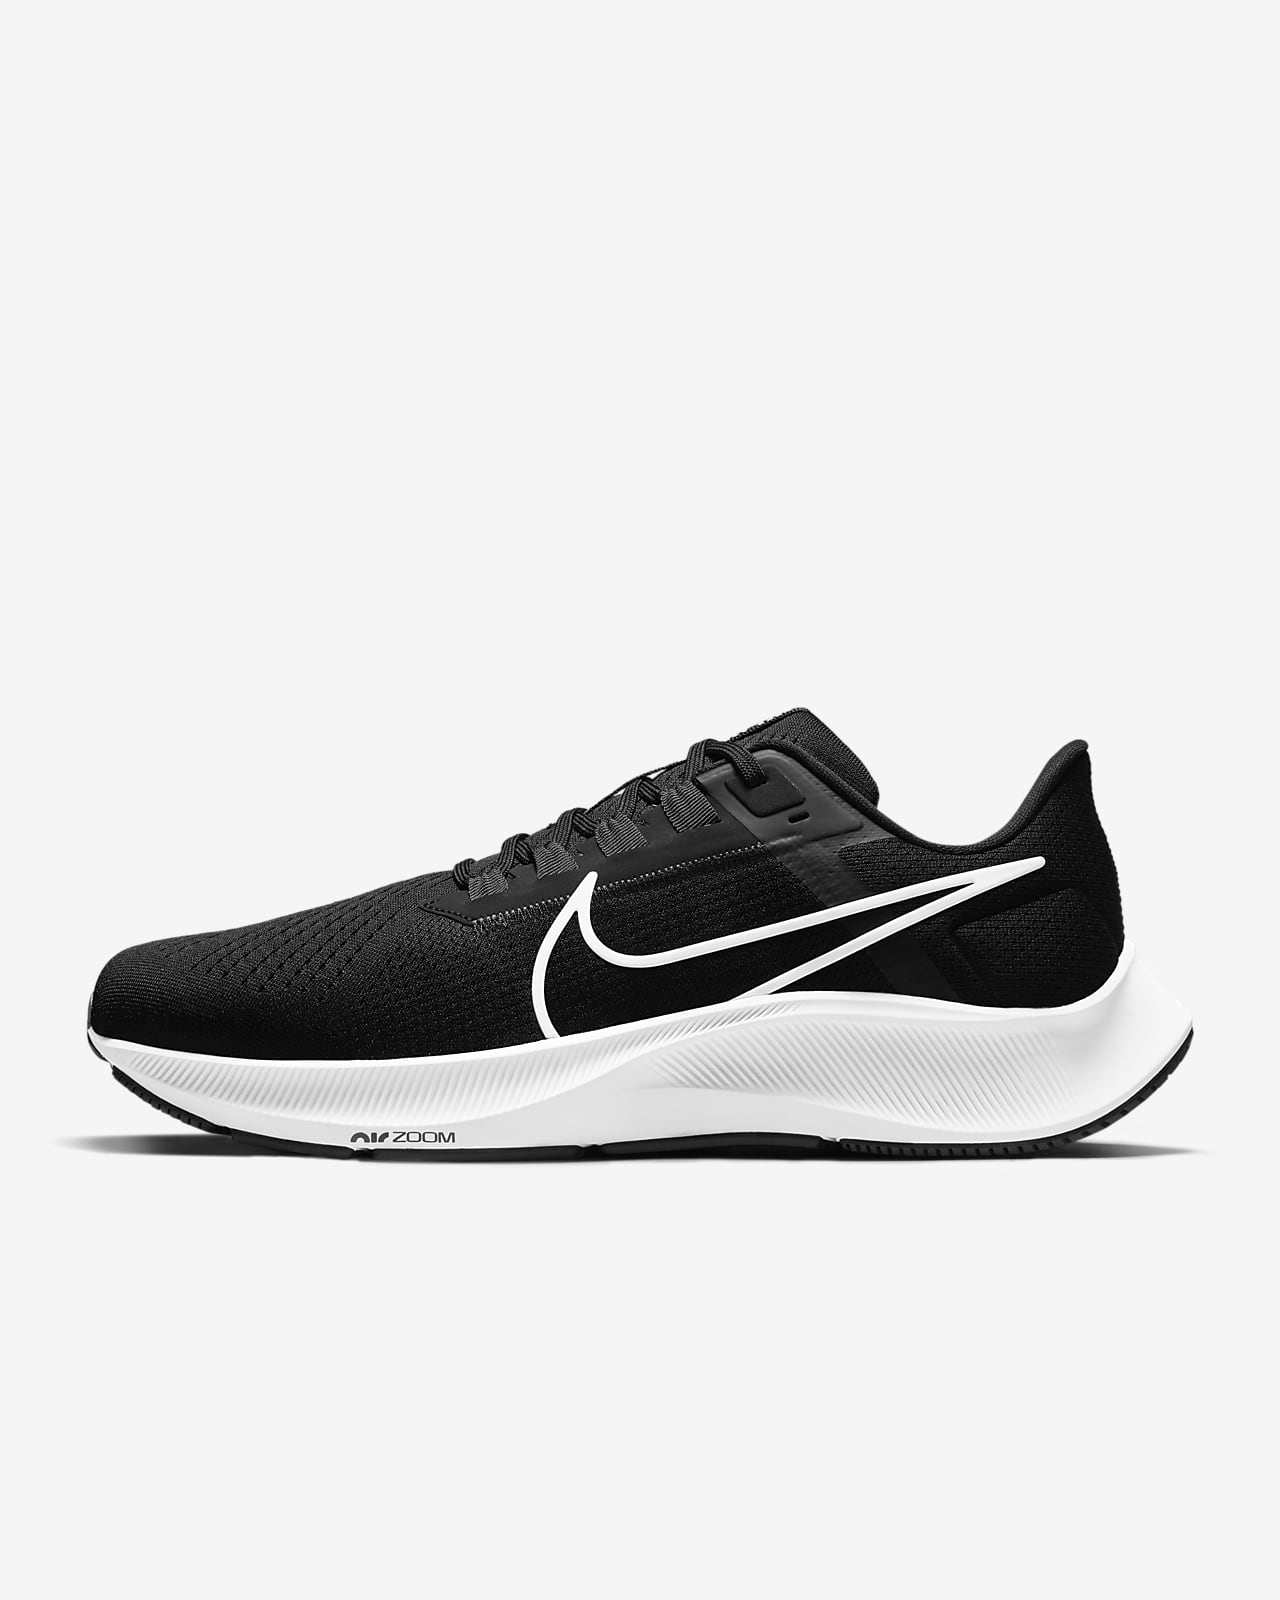 weightlifting shoes nike womens